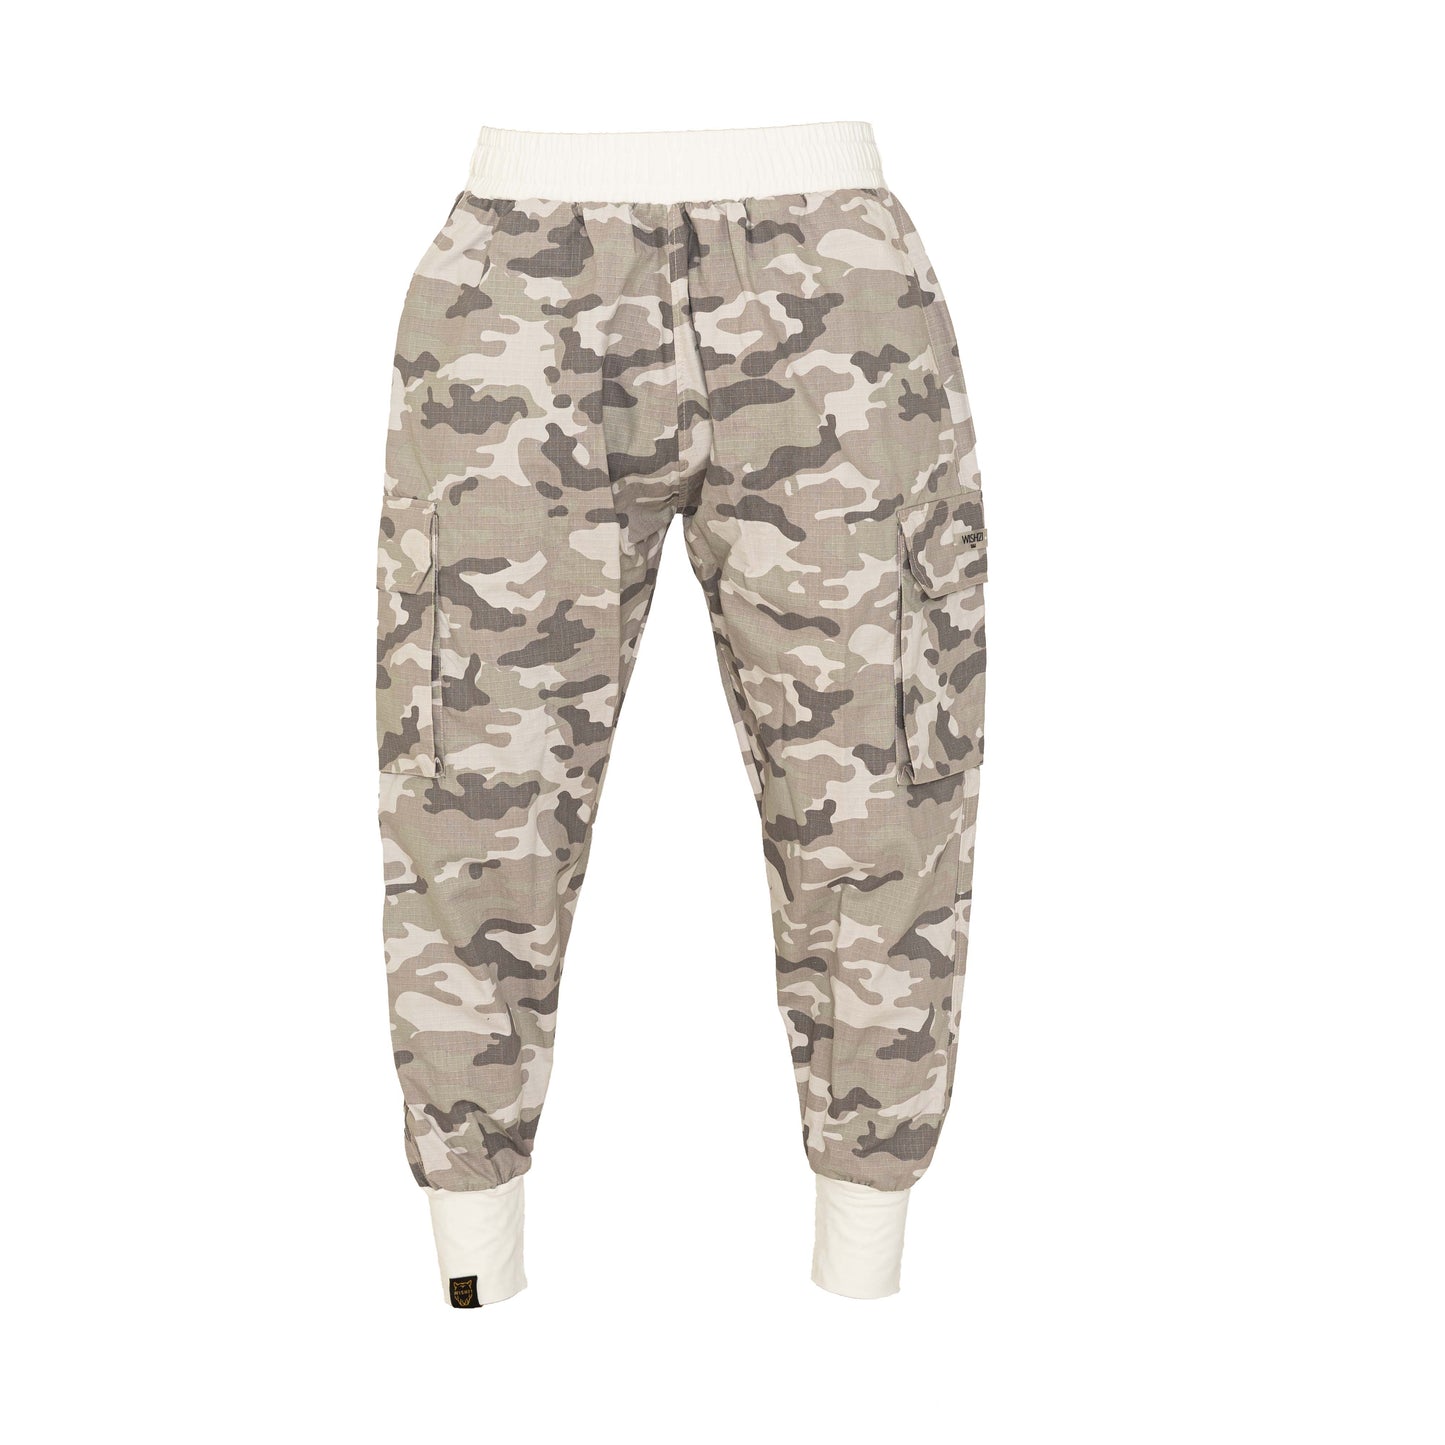 MEN'S ARMY STYLE TROUSERS